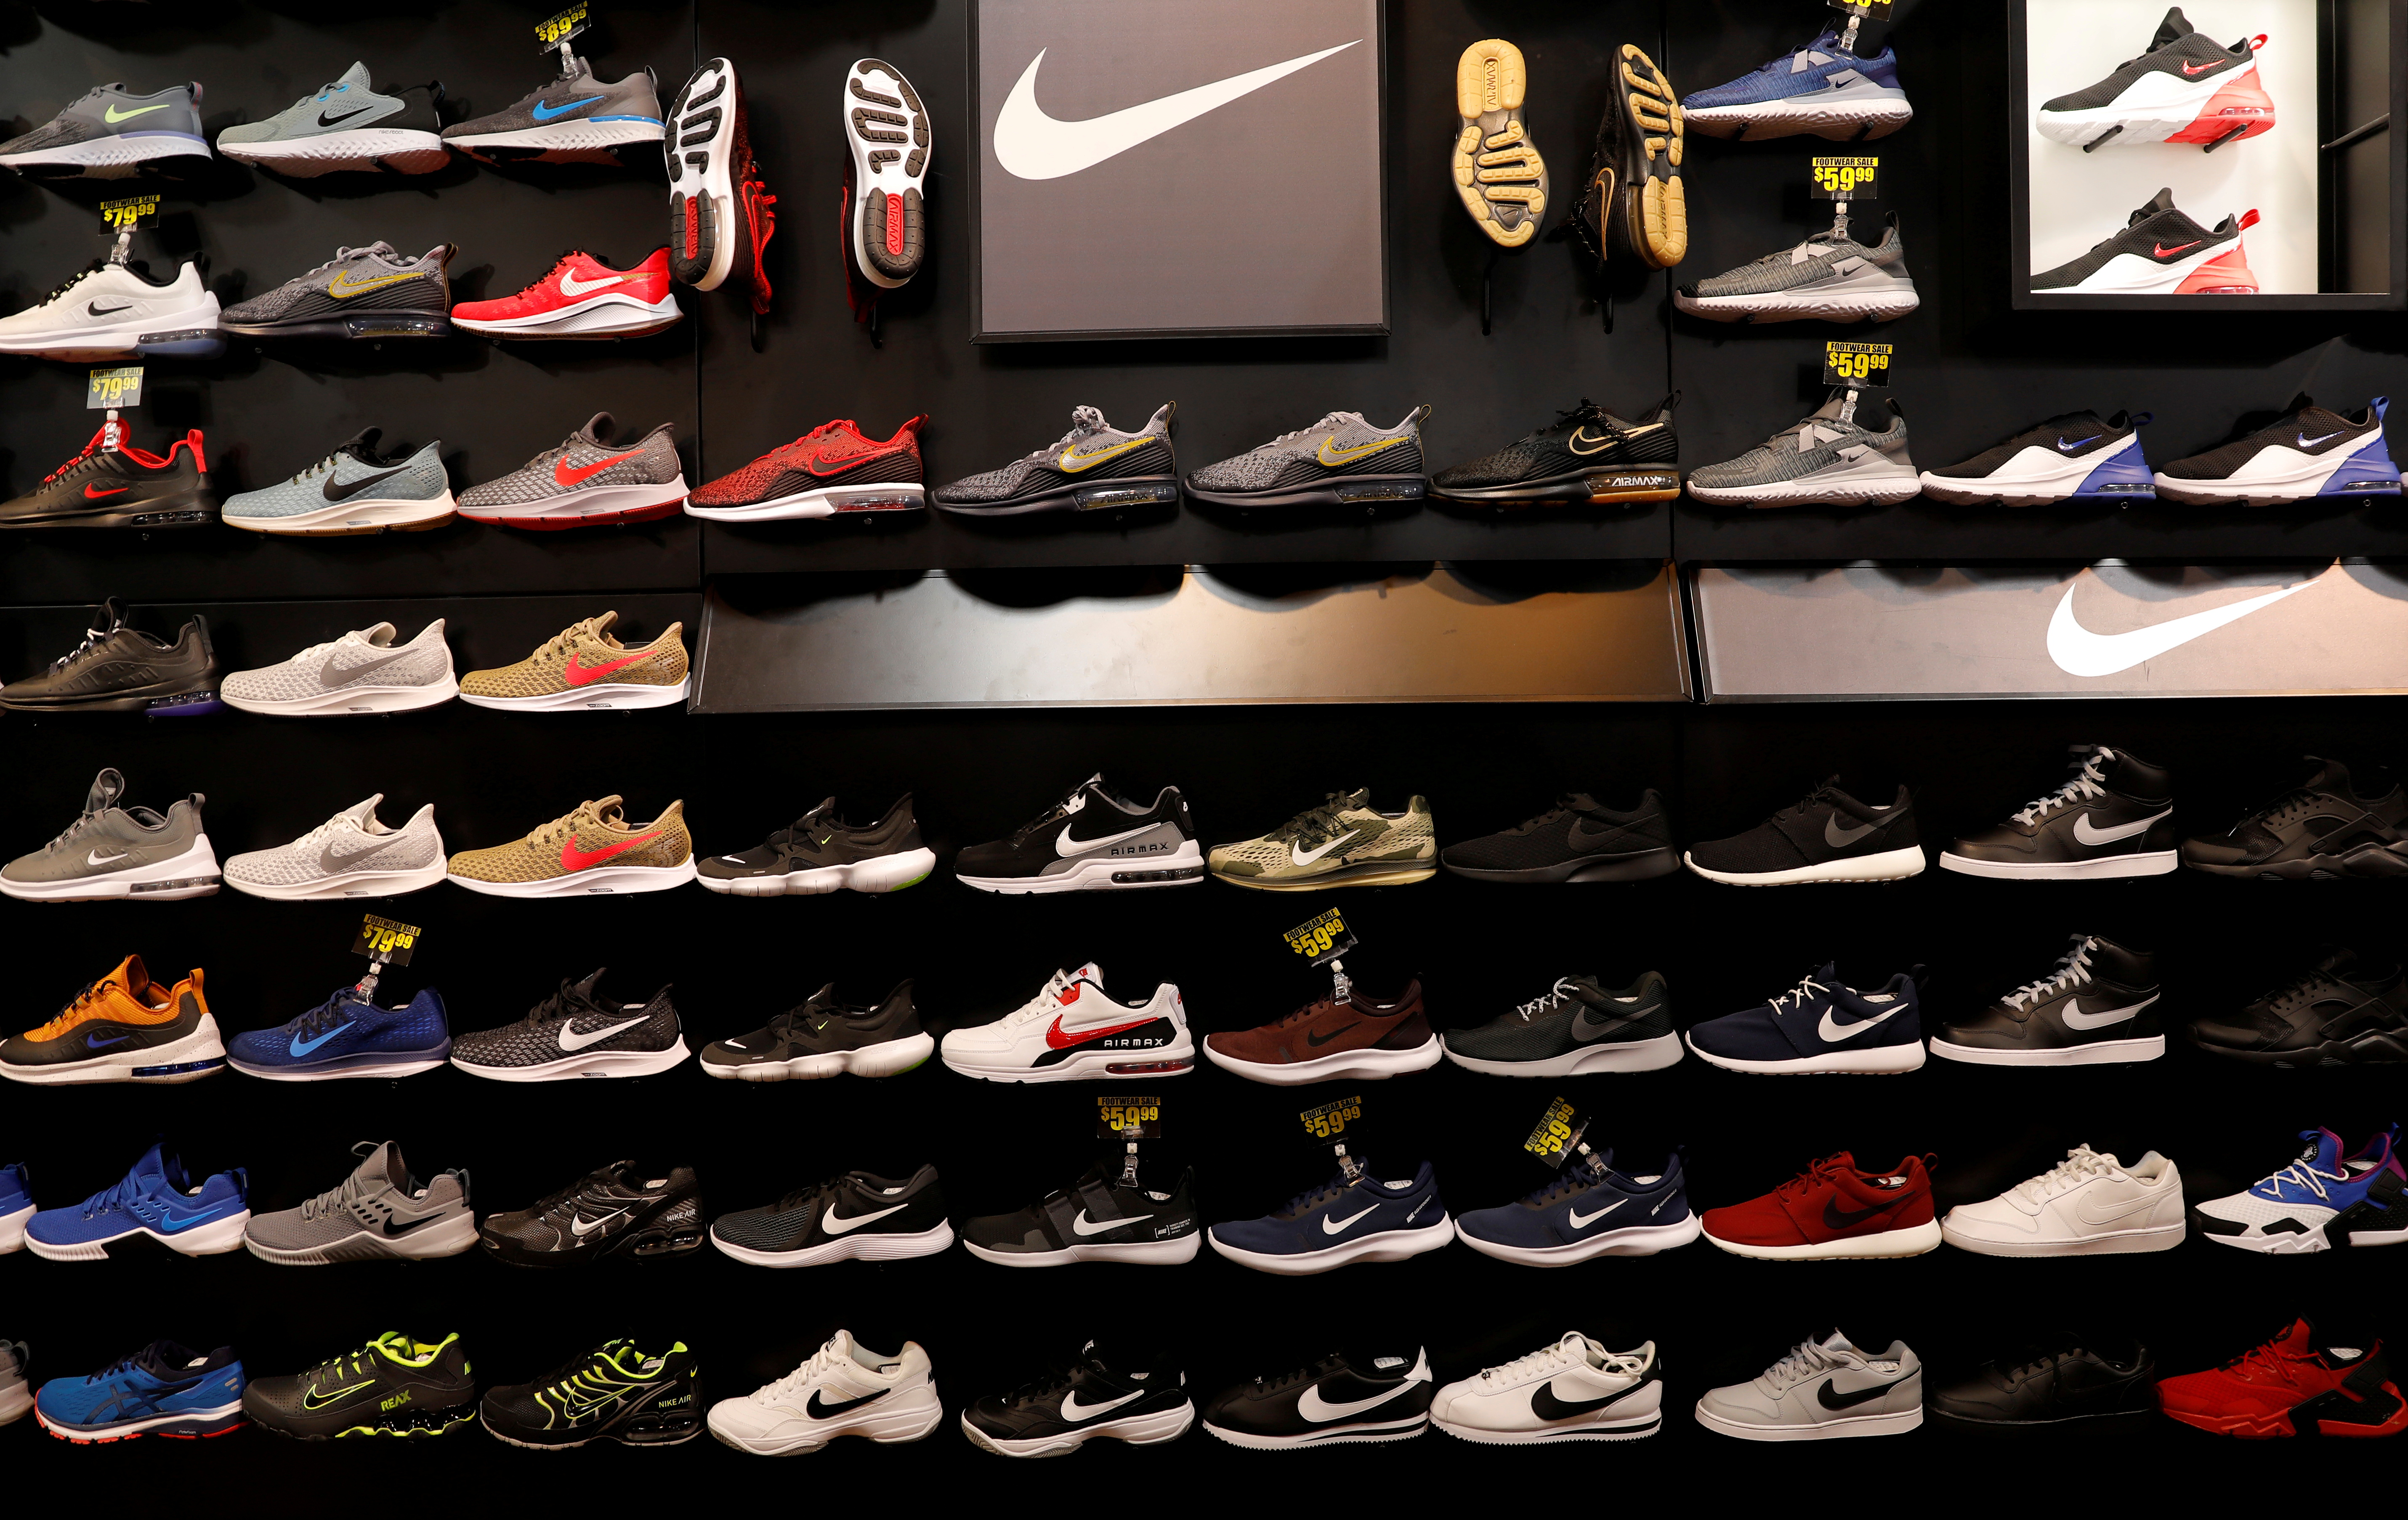 Nike warns on holiday delays, cuts full-year sales estimate | Reuters